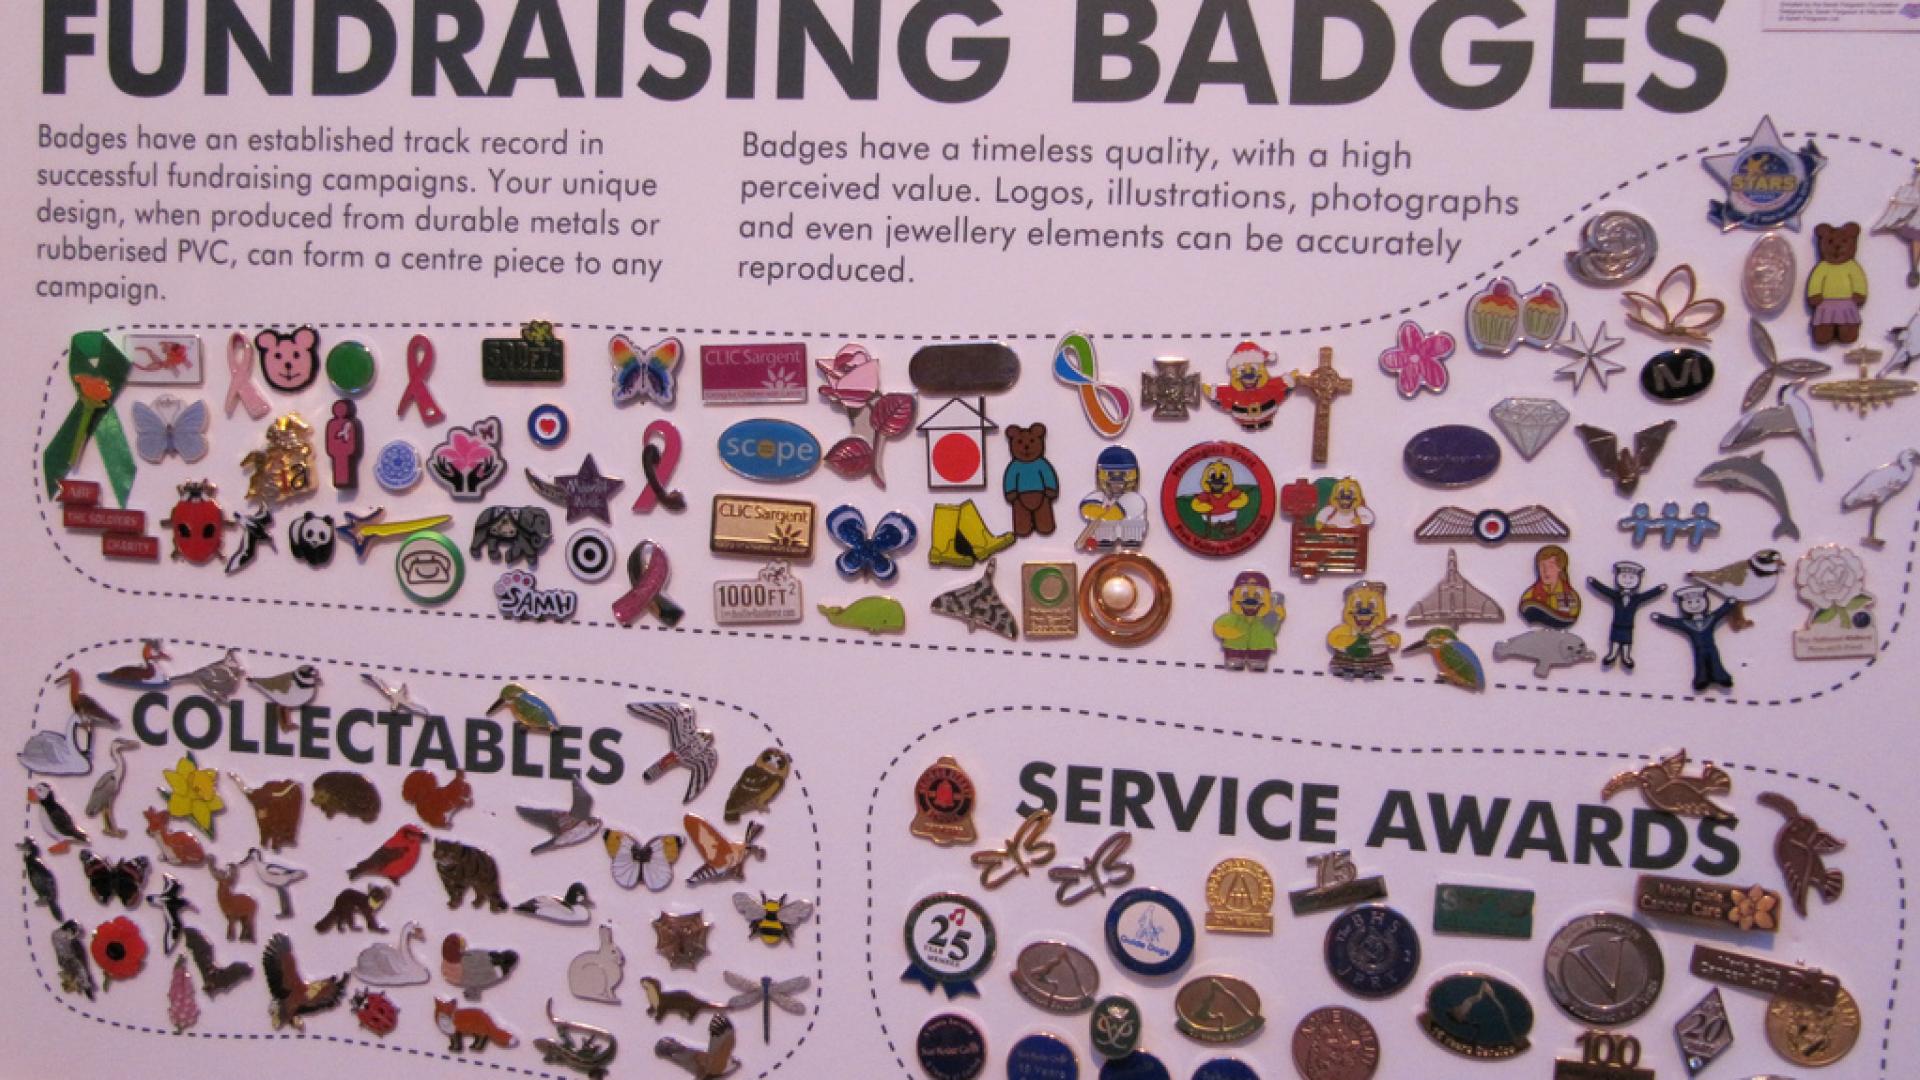 Collection of fundraising badges